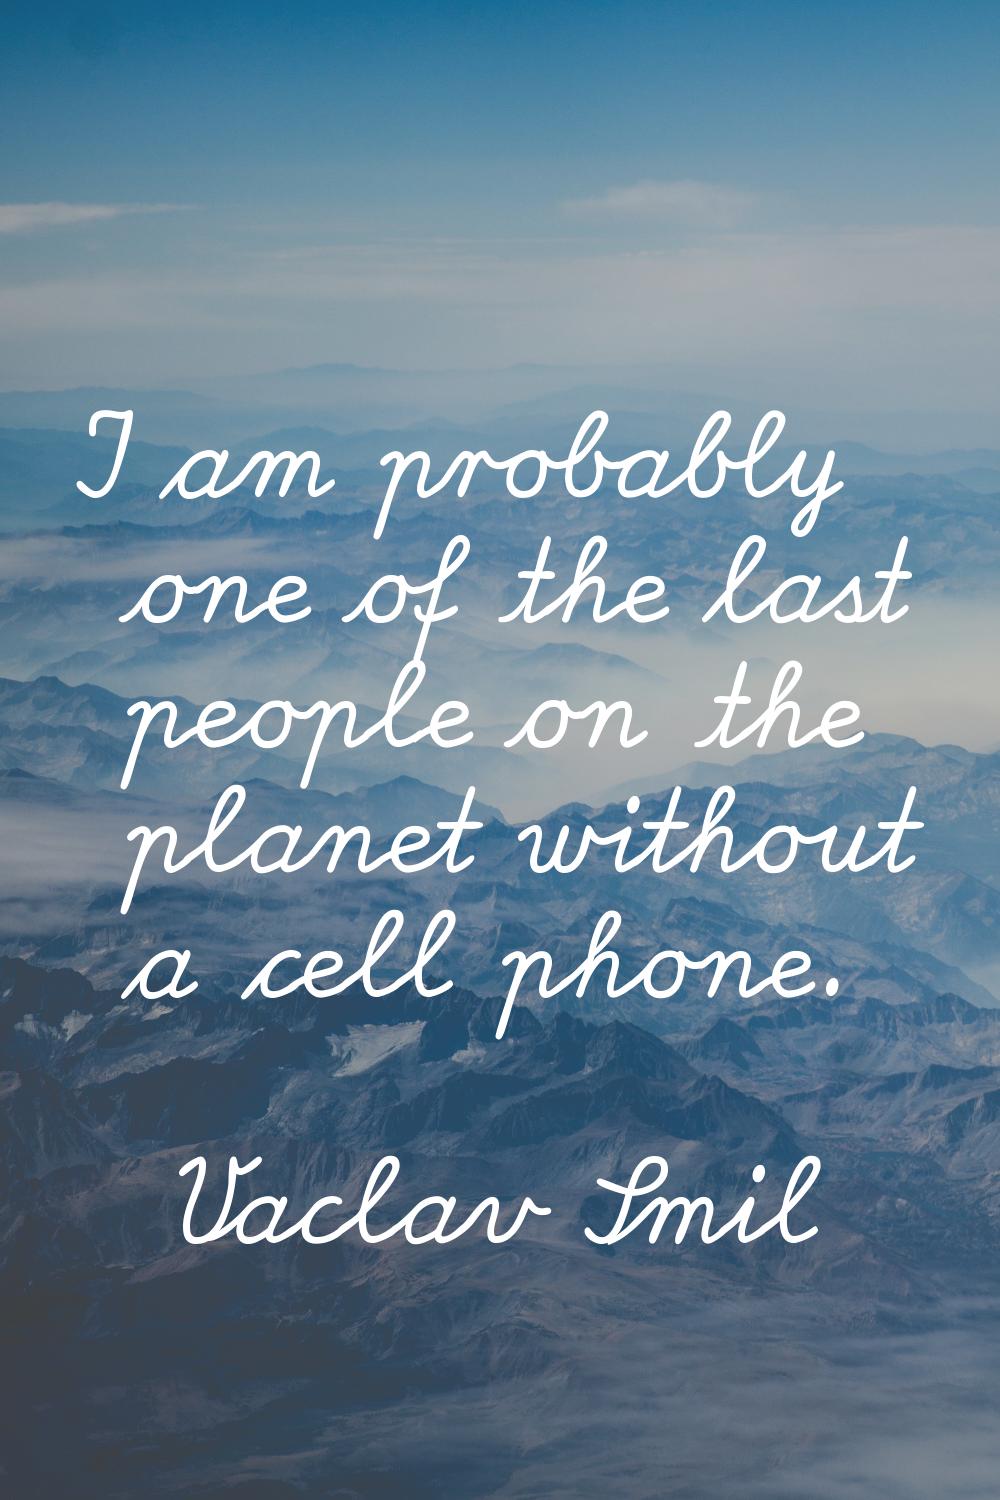 I am probably one of the last people on the planet without a cell phone.